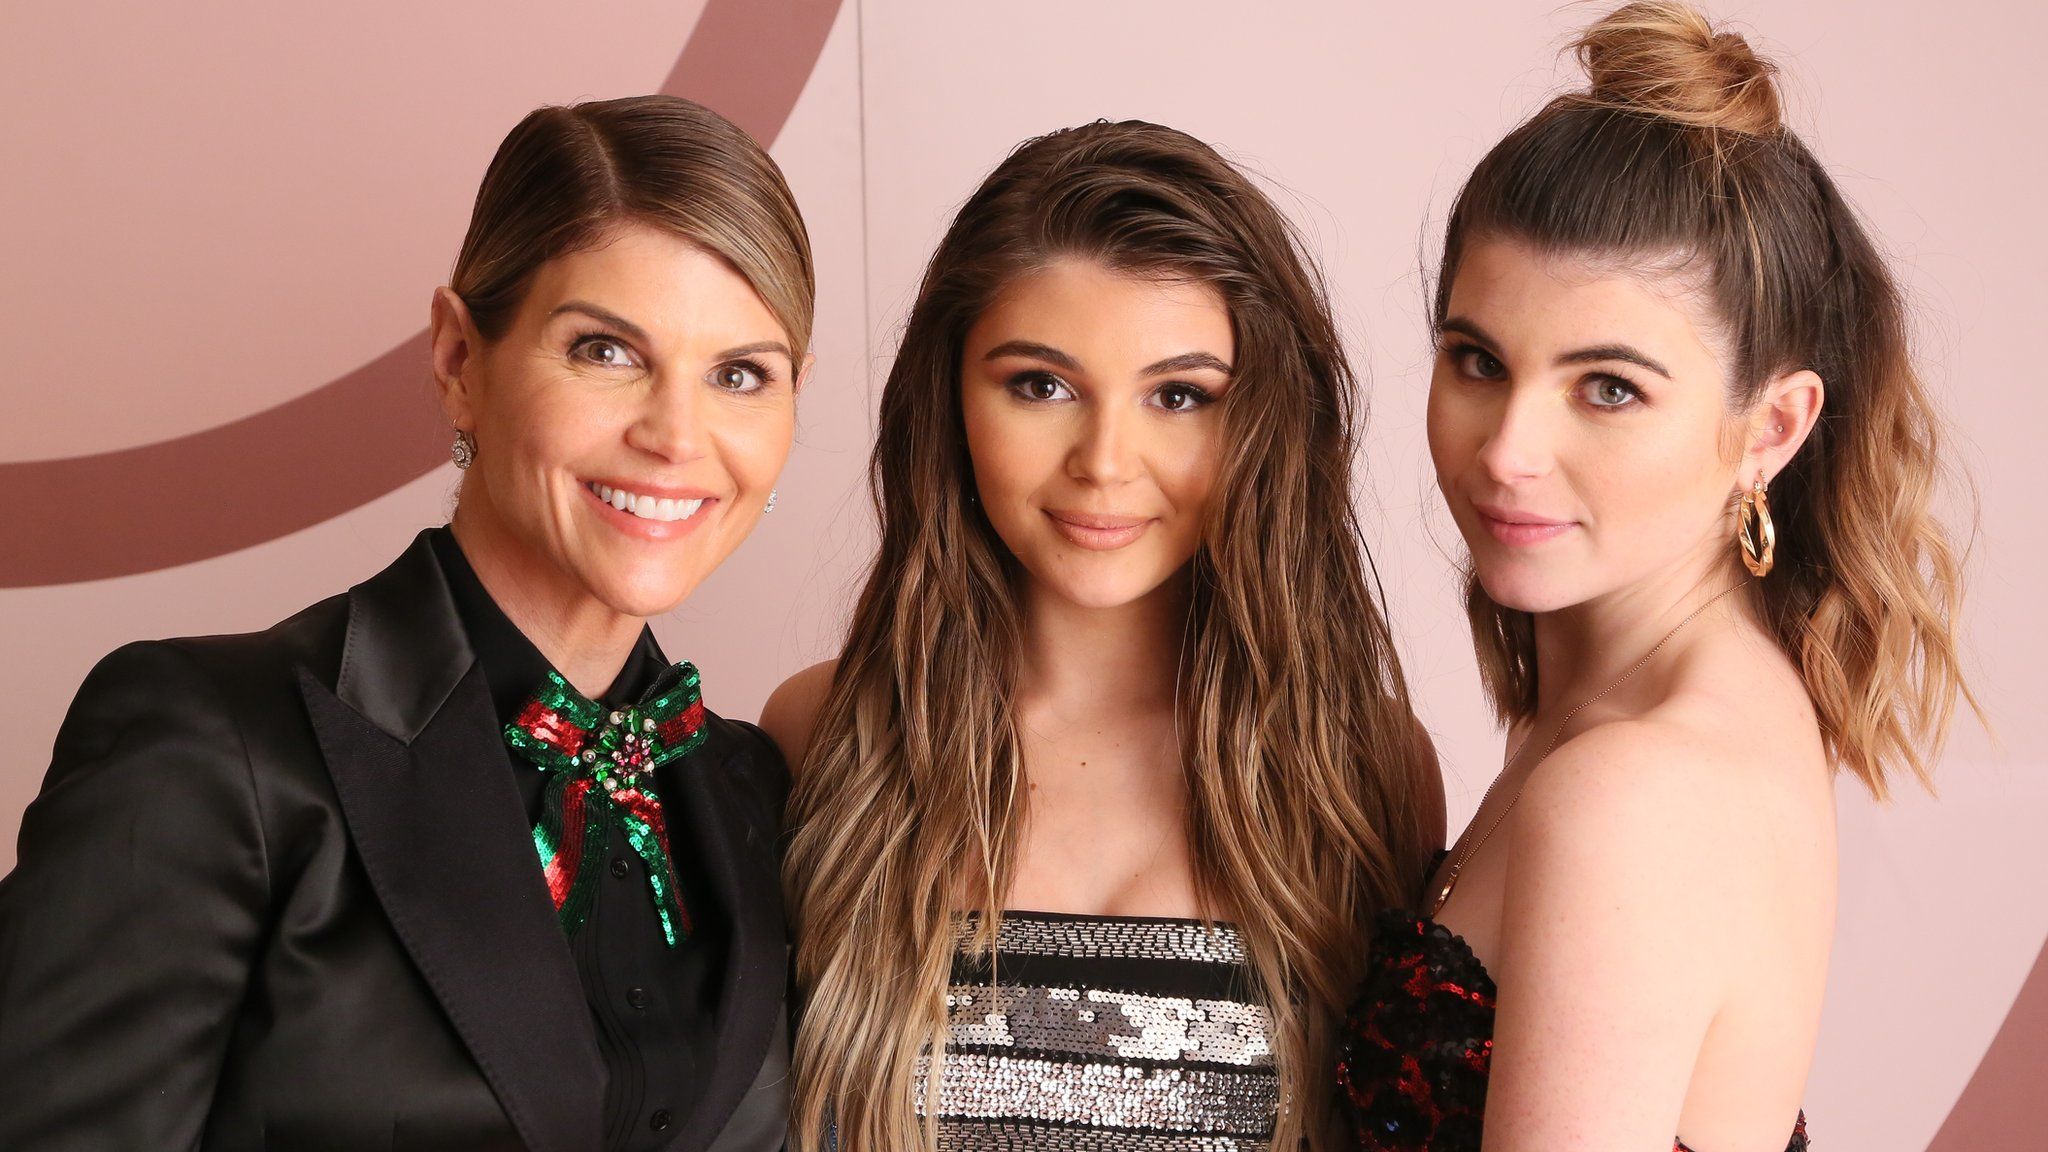 Lori Loughlin, Olivia Jade Giannulli and Isabella Rose Giannulli in West Hollywood in December 2018